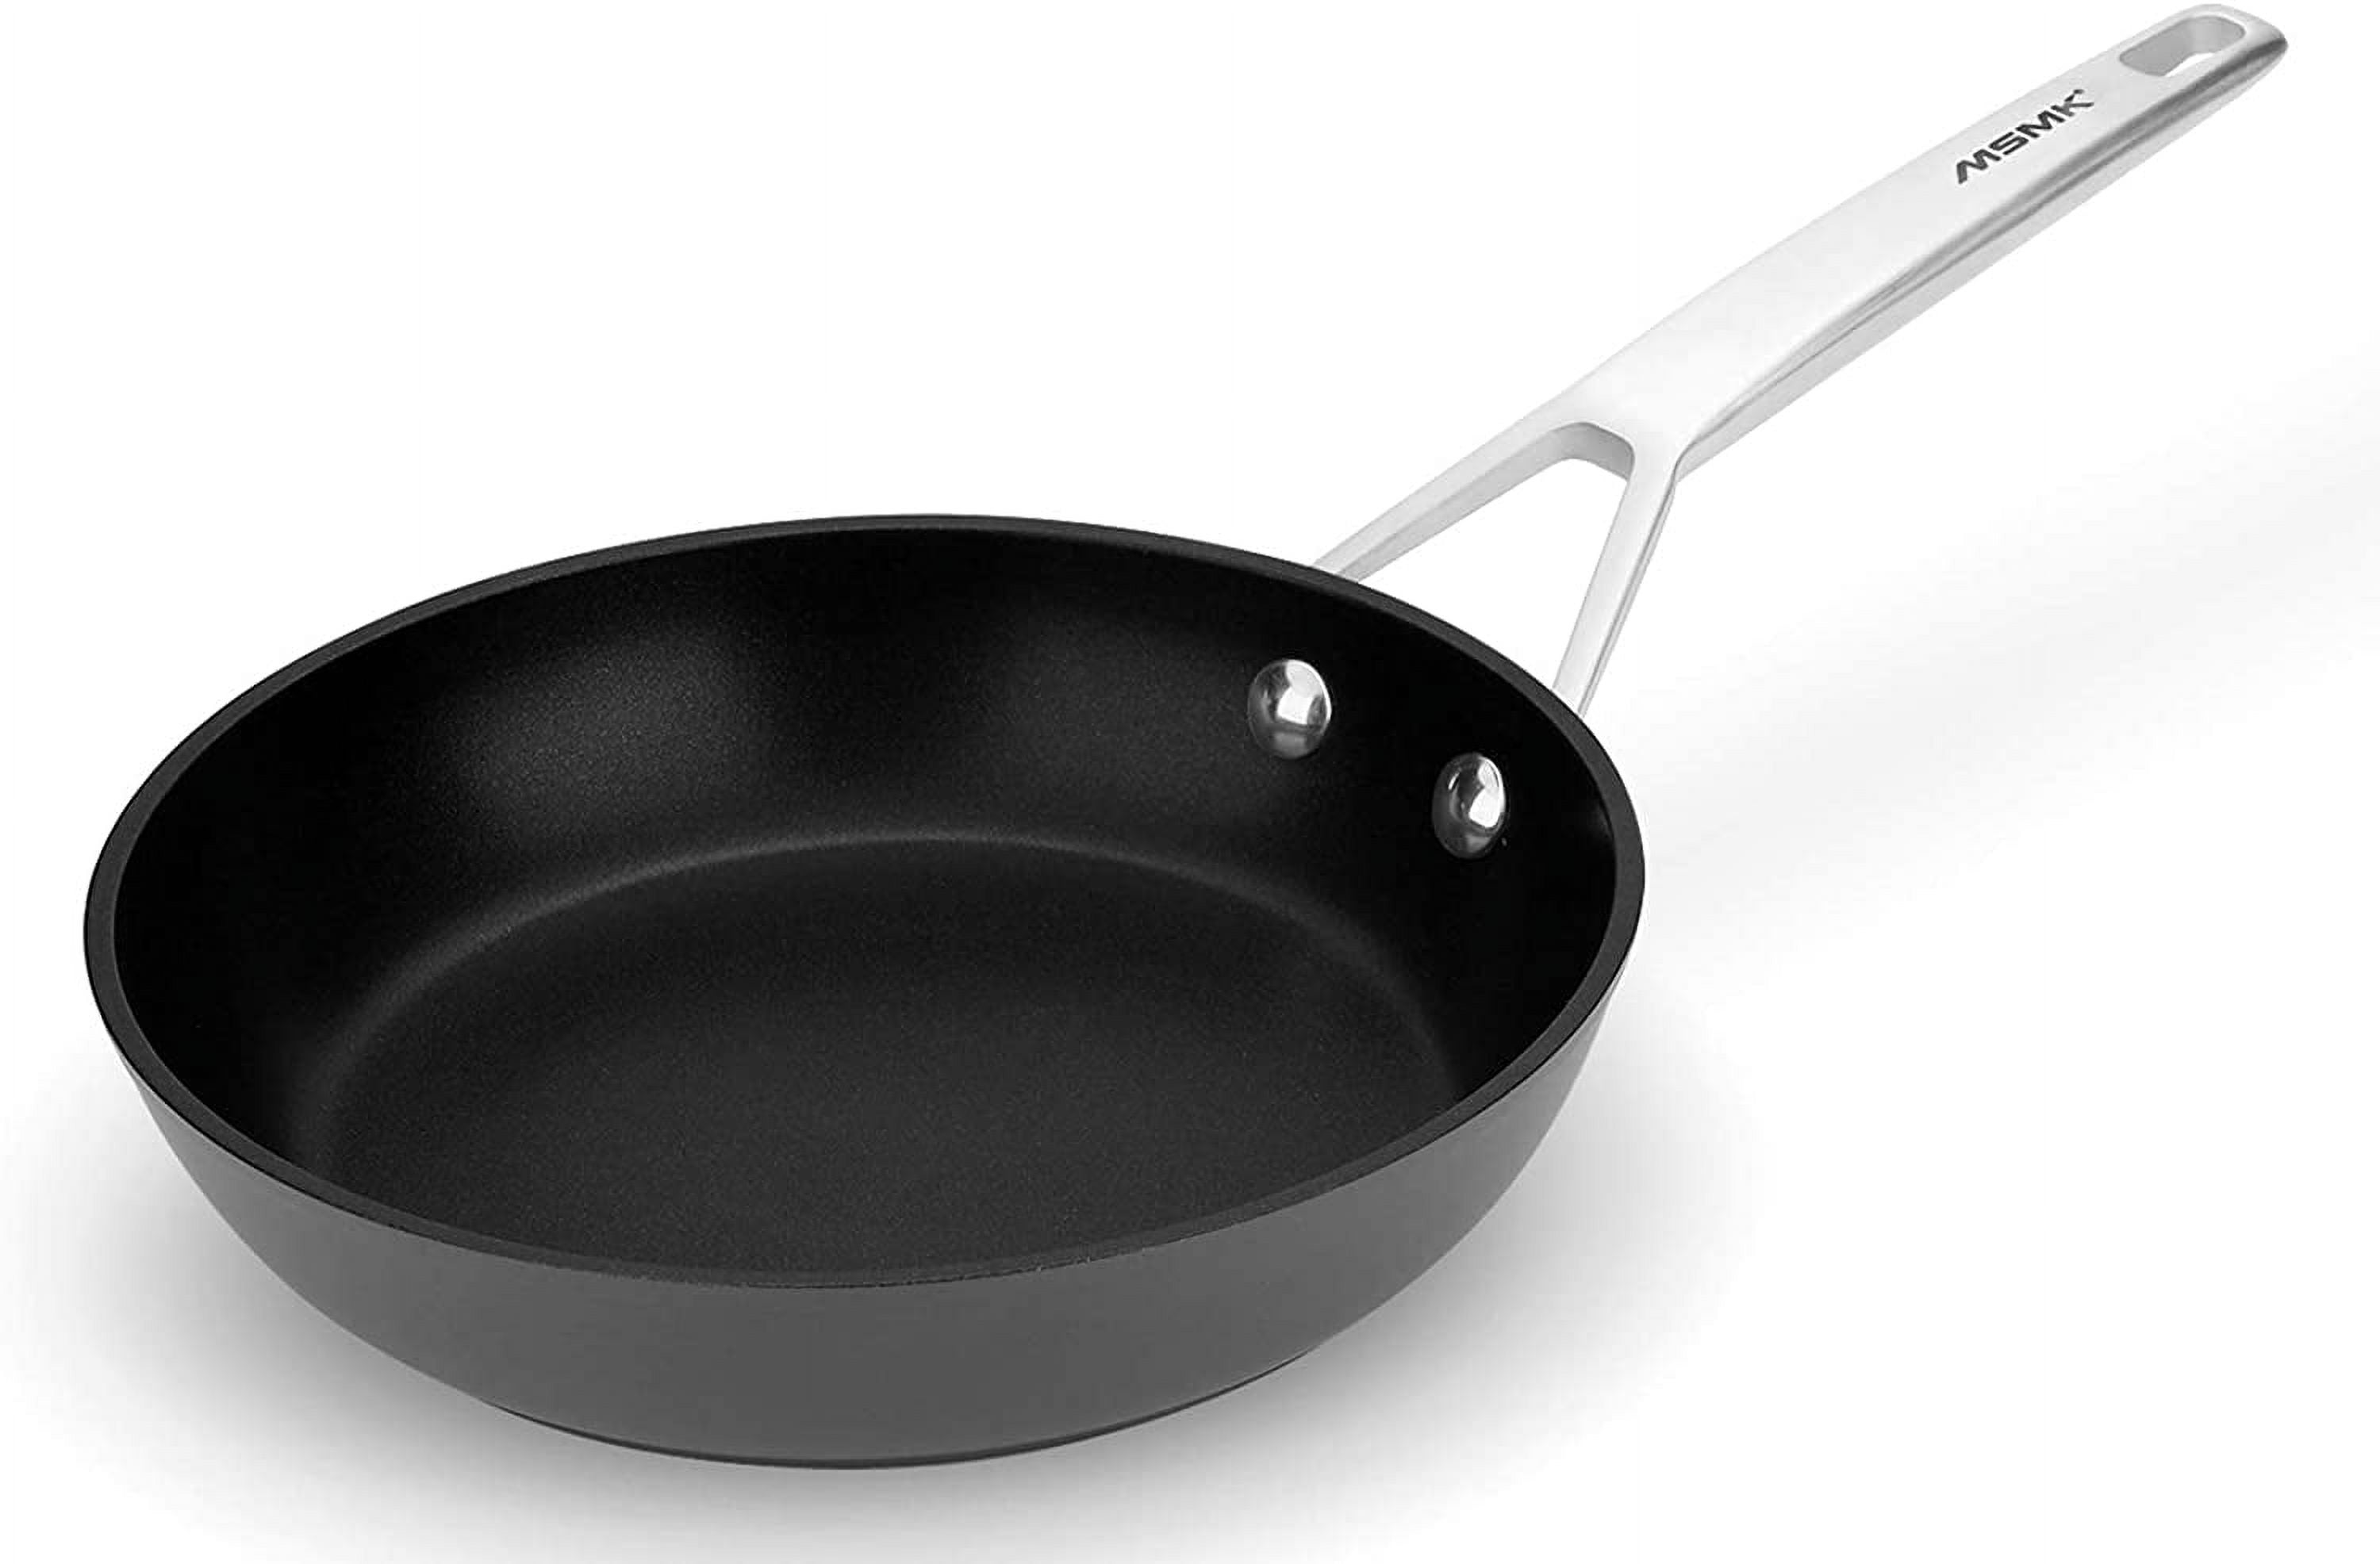 MsMk Small Egg Pan,8 1/2 inch Titanium and Ceramic Nonstick Omelette Pan,Small Frying Pan Safe for Induction,Scratch-resistant,Oven Safe to 700°F